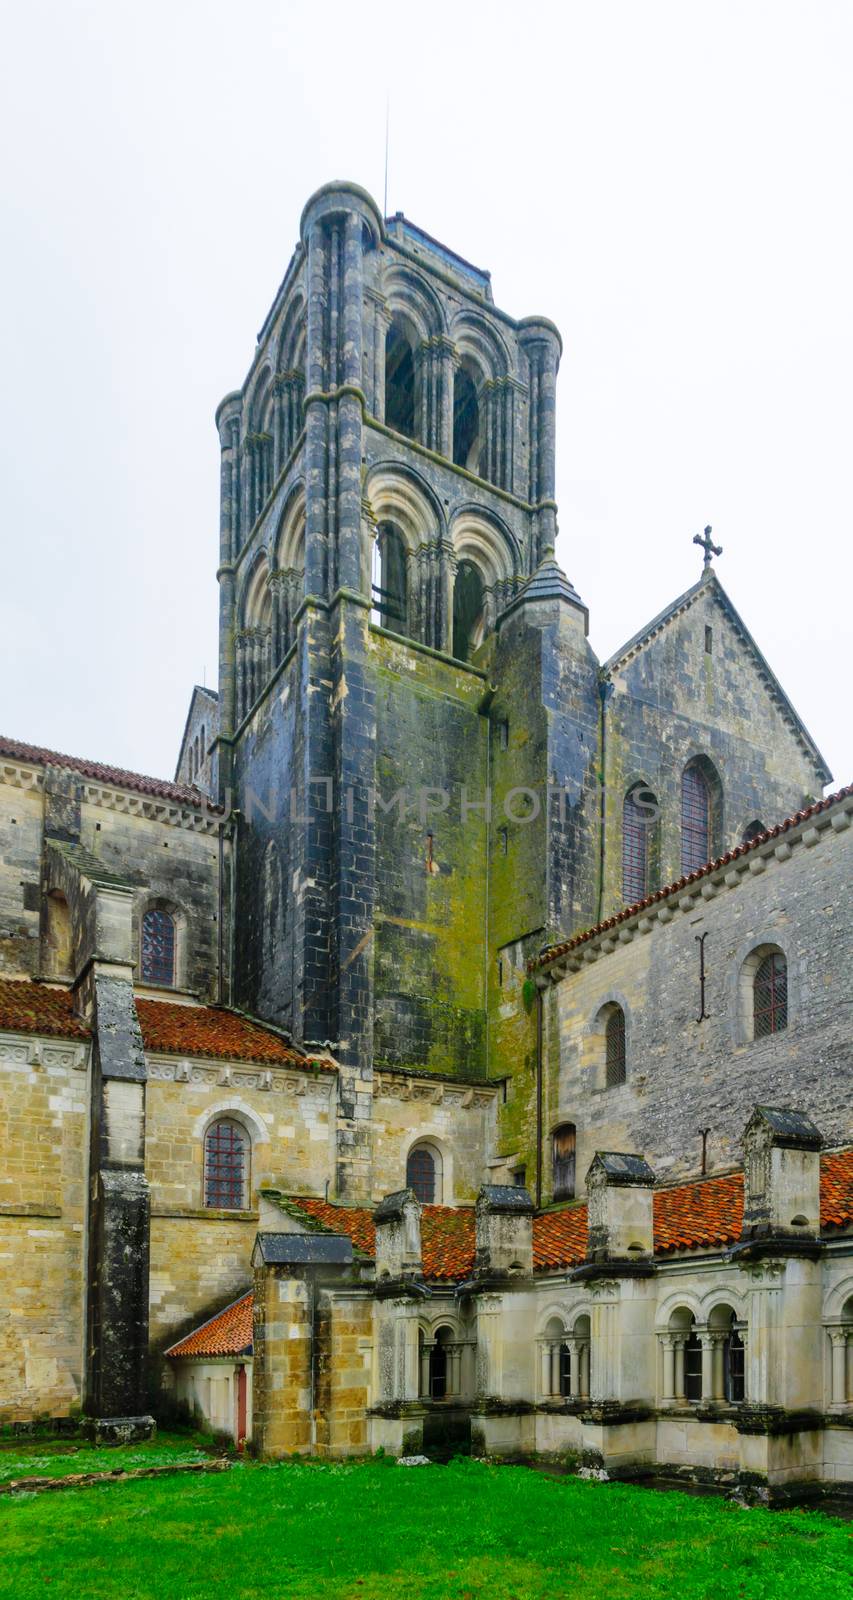 The Vezelay Abbey by RnDmS